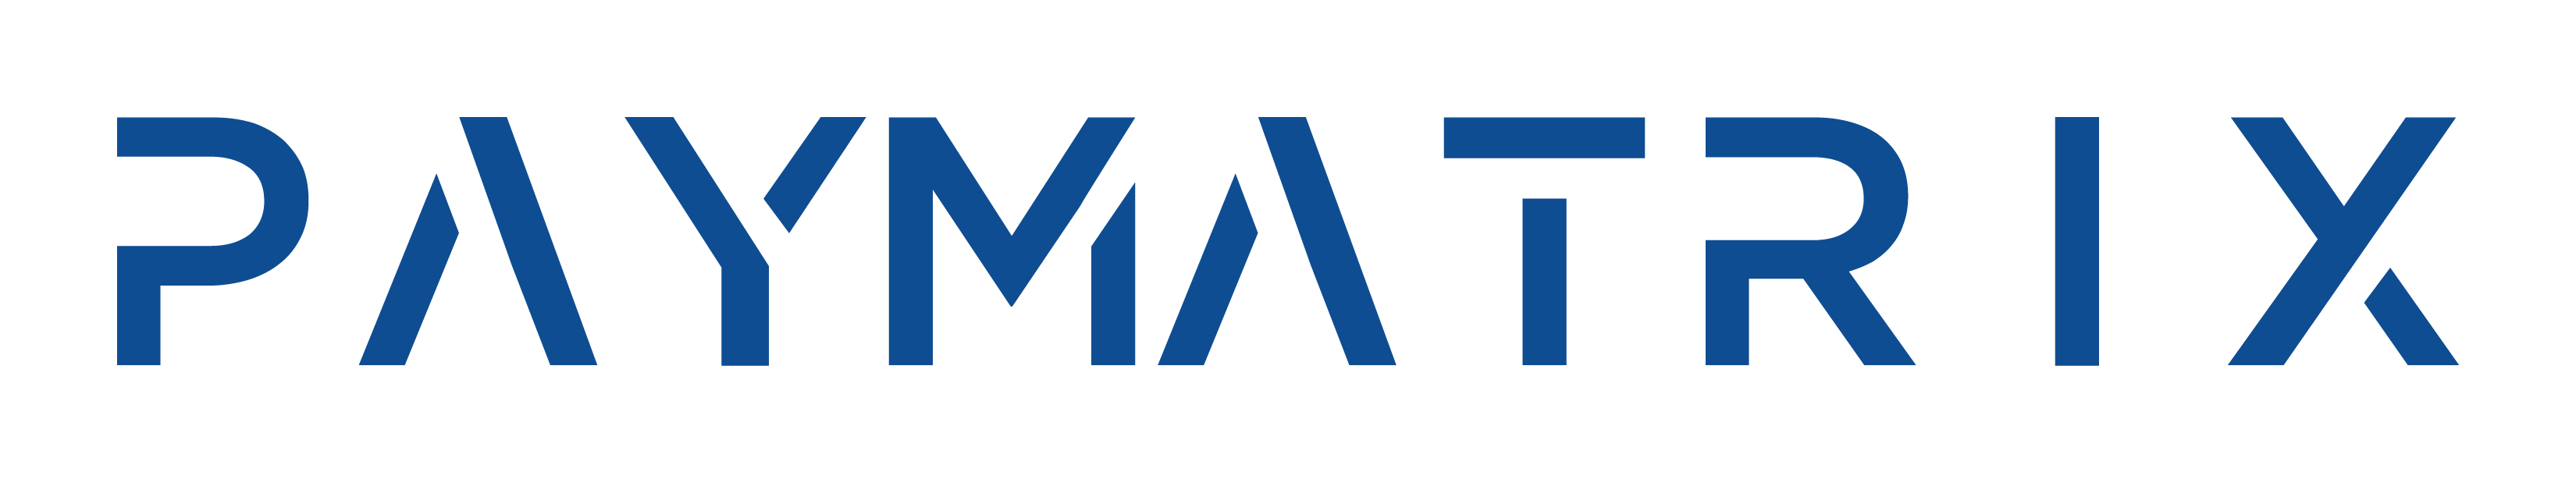 The logo of paymatrix in blue with transparent background